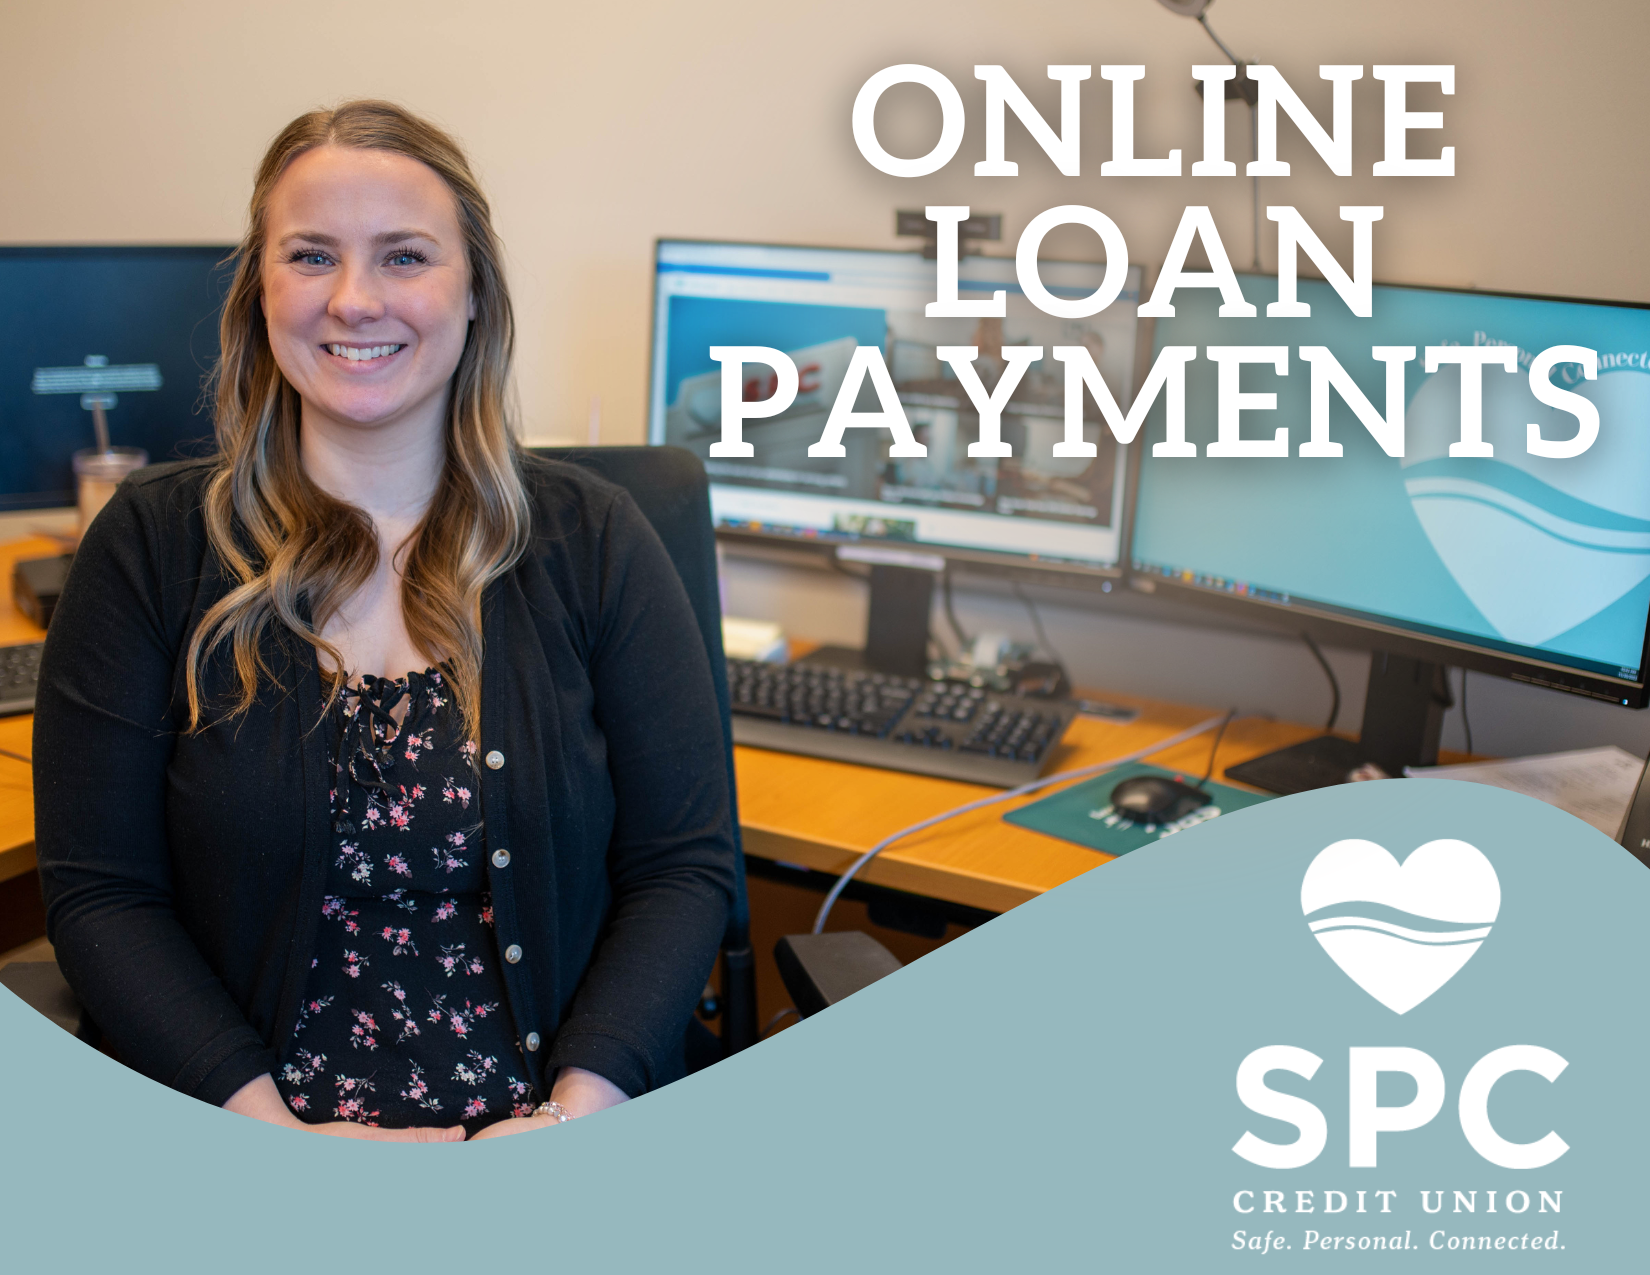 Online Loan Payments Instructions